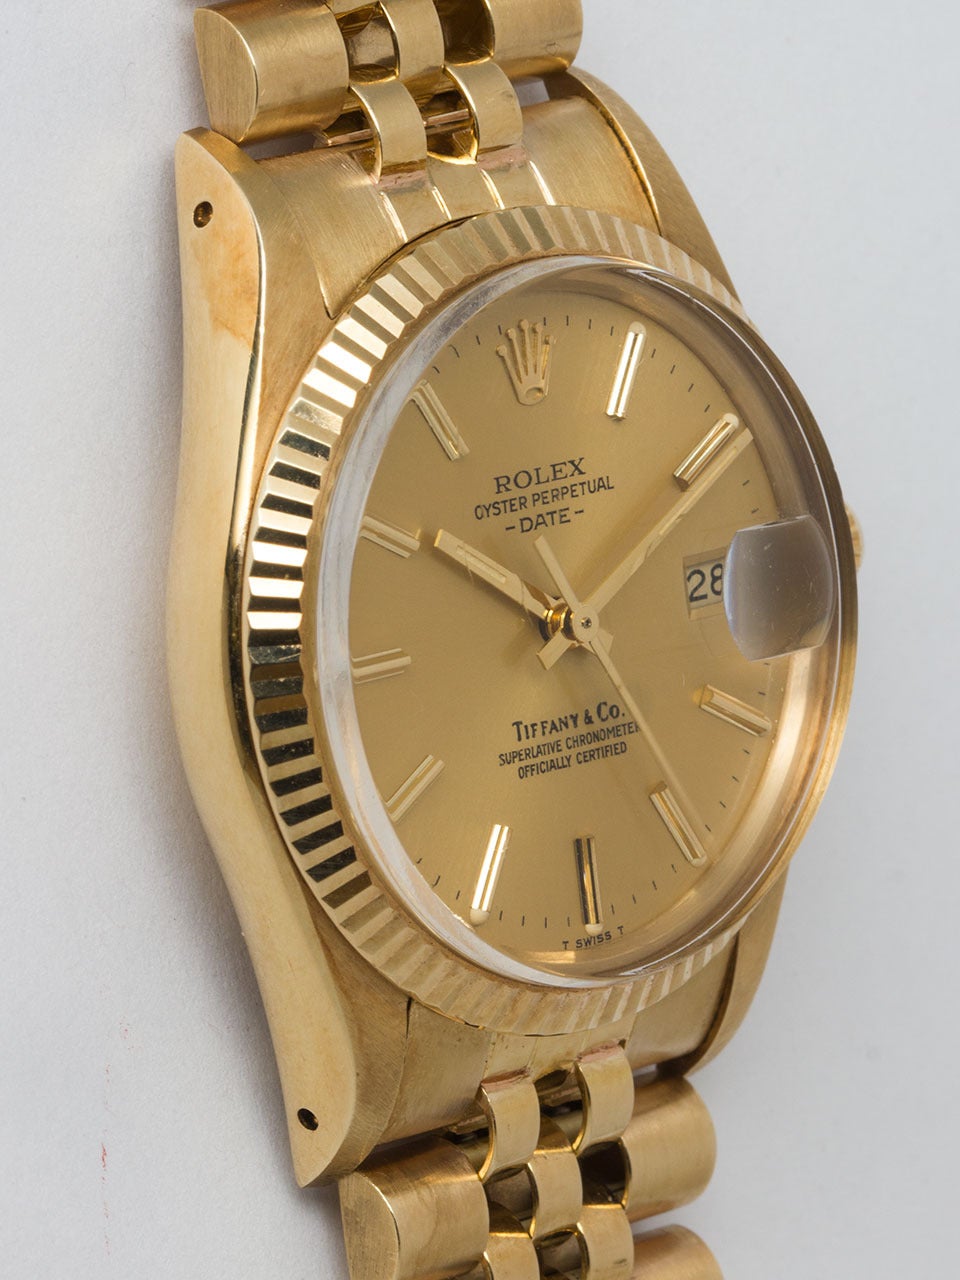 Rolex 14K Yellow Gold Tiffany & Co Oyster Perpetual Date ref 15037 serial #6.7 million circa 1981. Featuring 34mm diameter case with fluted bezel and  acrylic crystal. Original Tiffany & Co signed champagne dial with applied gold indexes and hands,